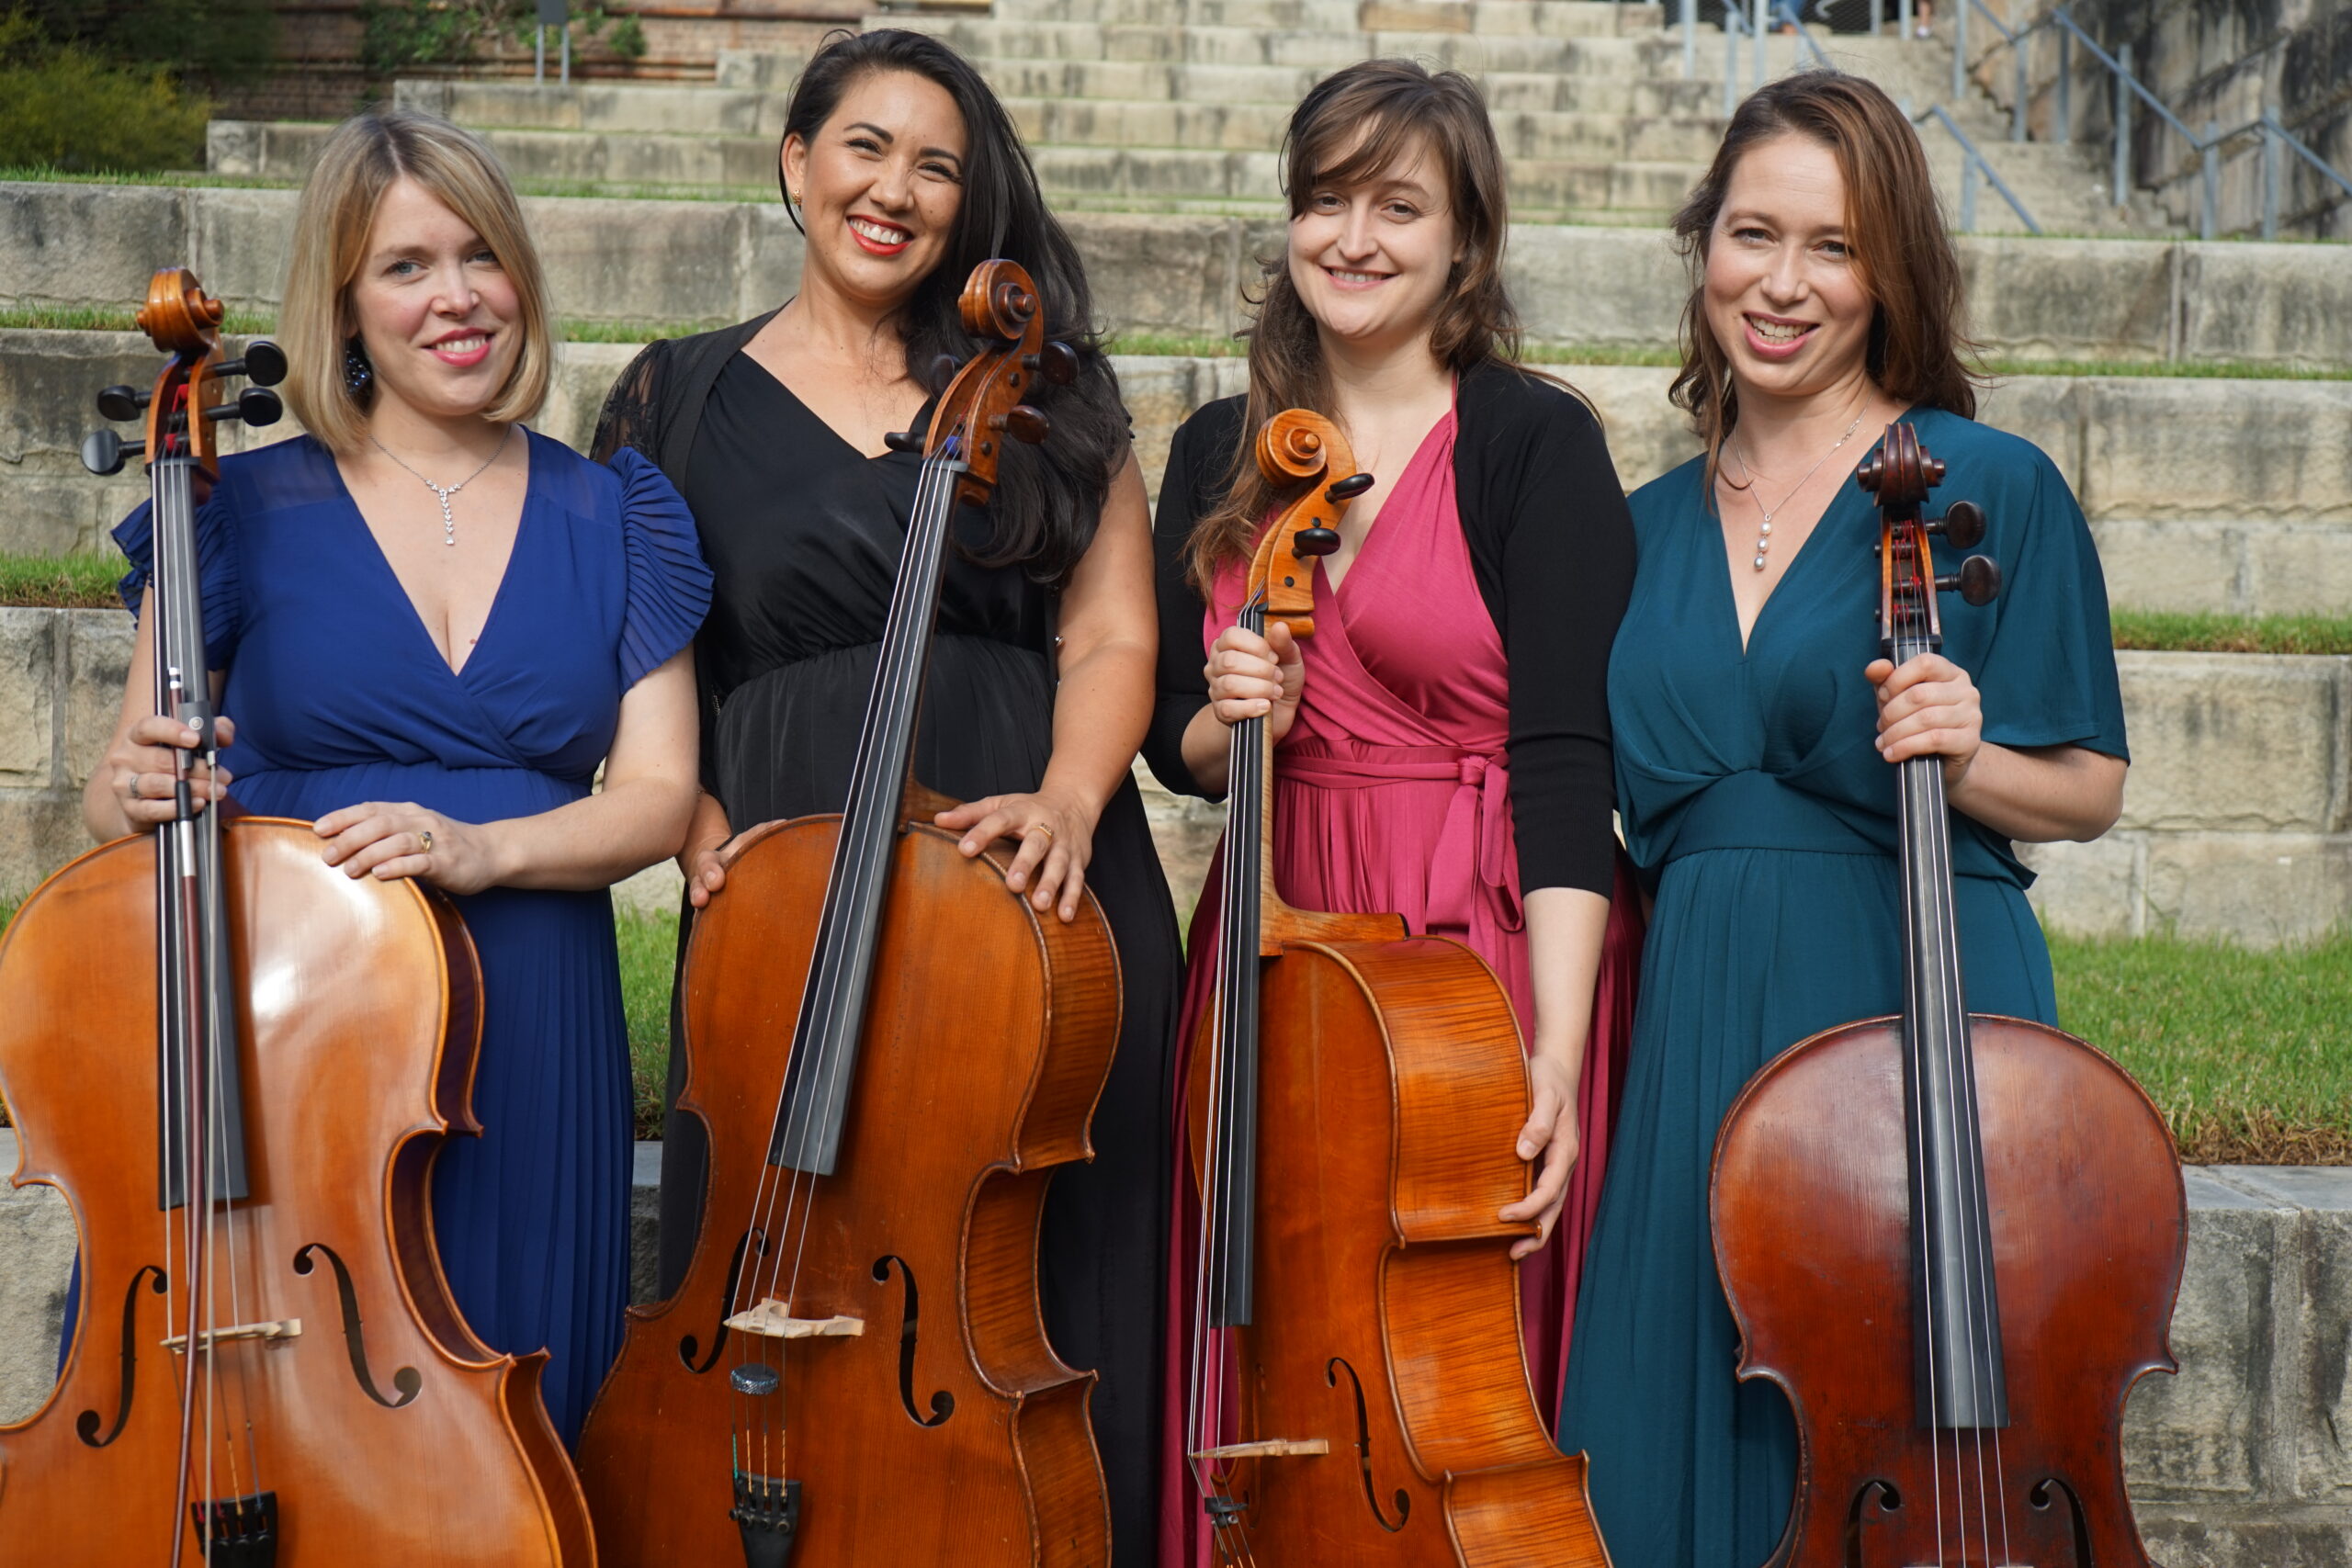 A photo of four people with their cellos, the members of the Sydney Cello Quartet.